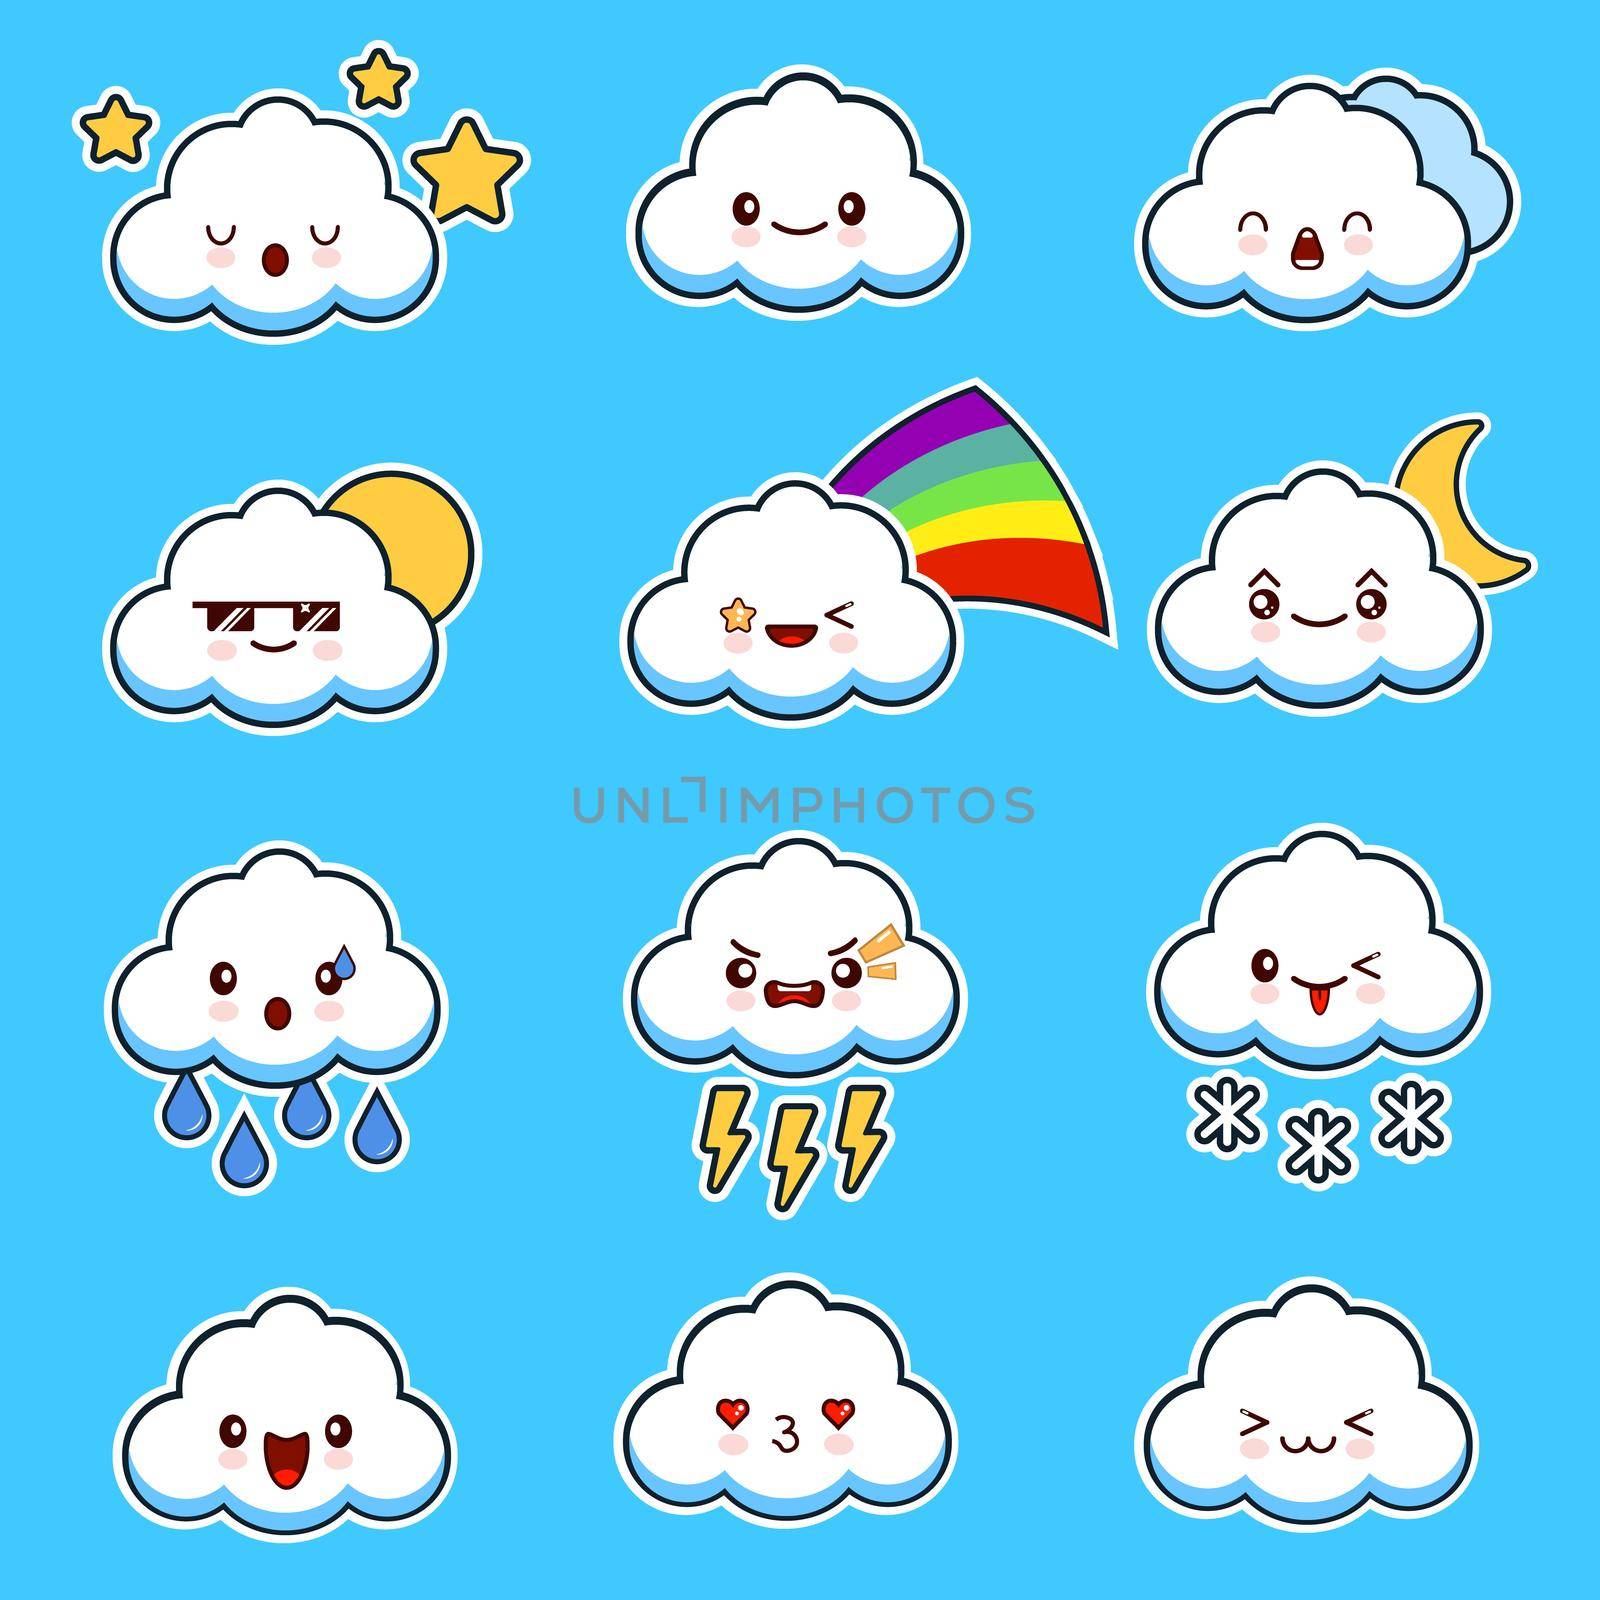 Emoji clouds . Cute smily clouds with faces set. Cartoon funny emoticon. by Alxyzt